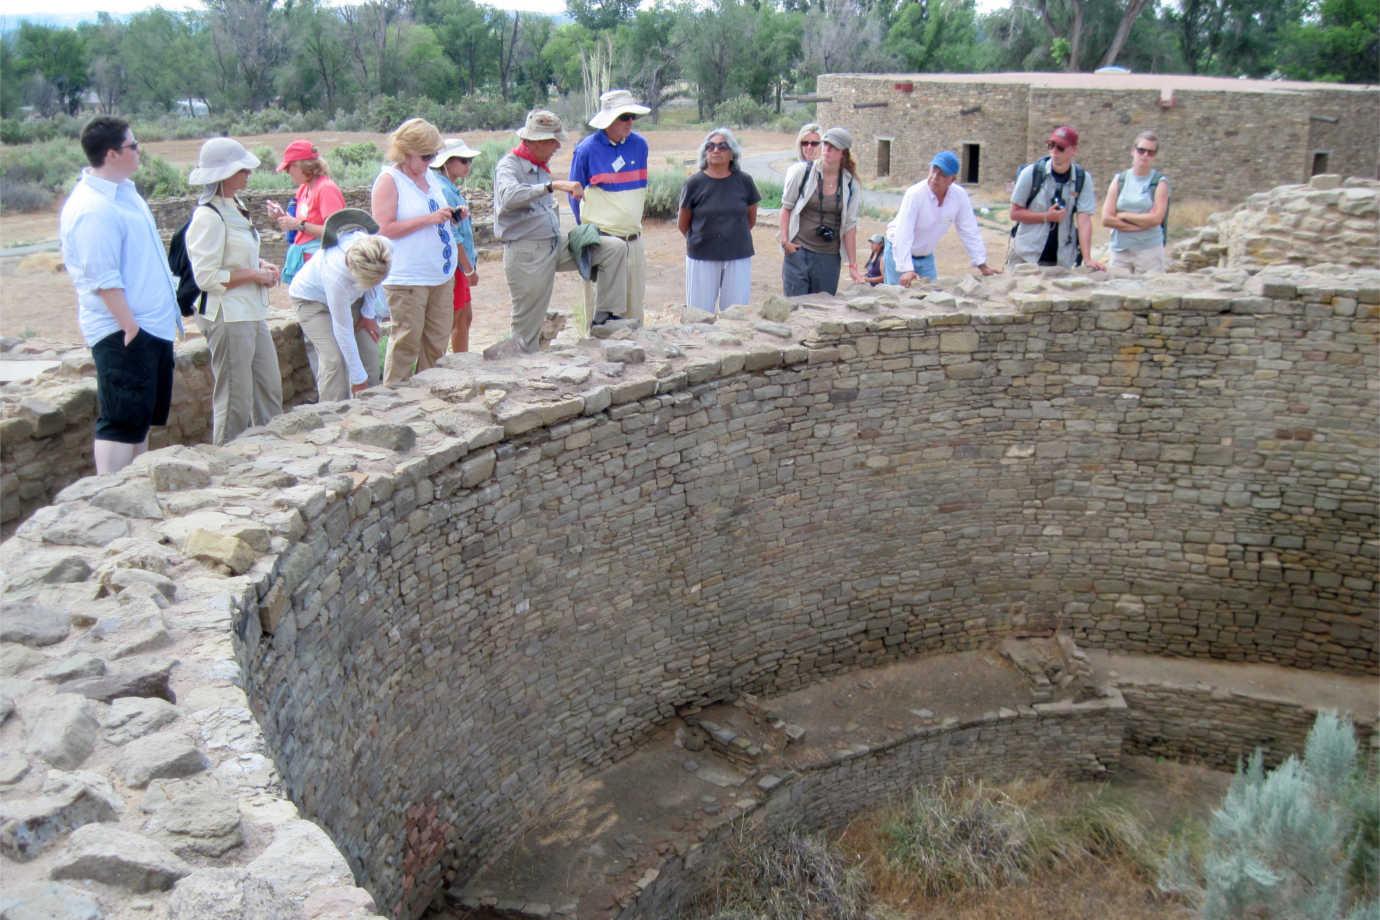 Participants study the history and culture of the Pueblo people, learn archaeological techniques and interpretive methods, visit cliff dwellings, and take part in active excavations. Image courtesy of Crow Canyon Archaeological Center.